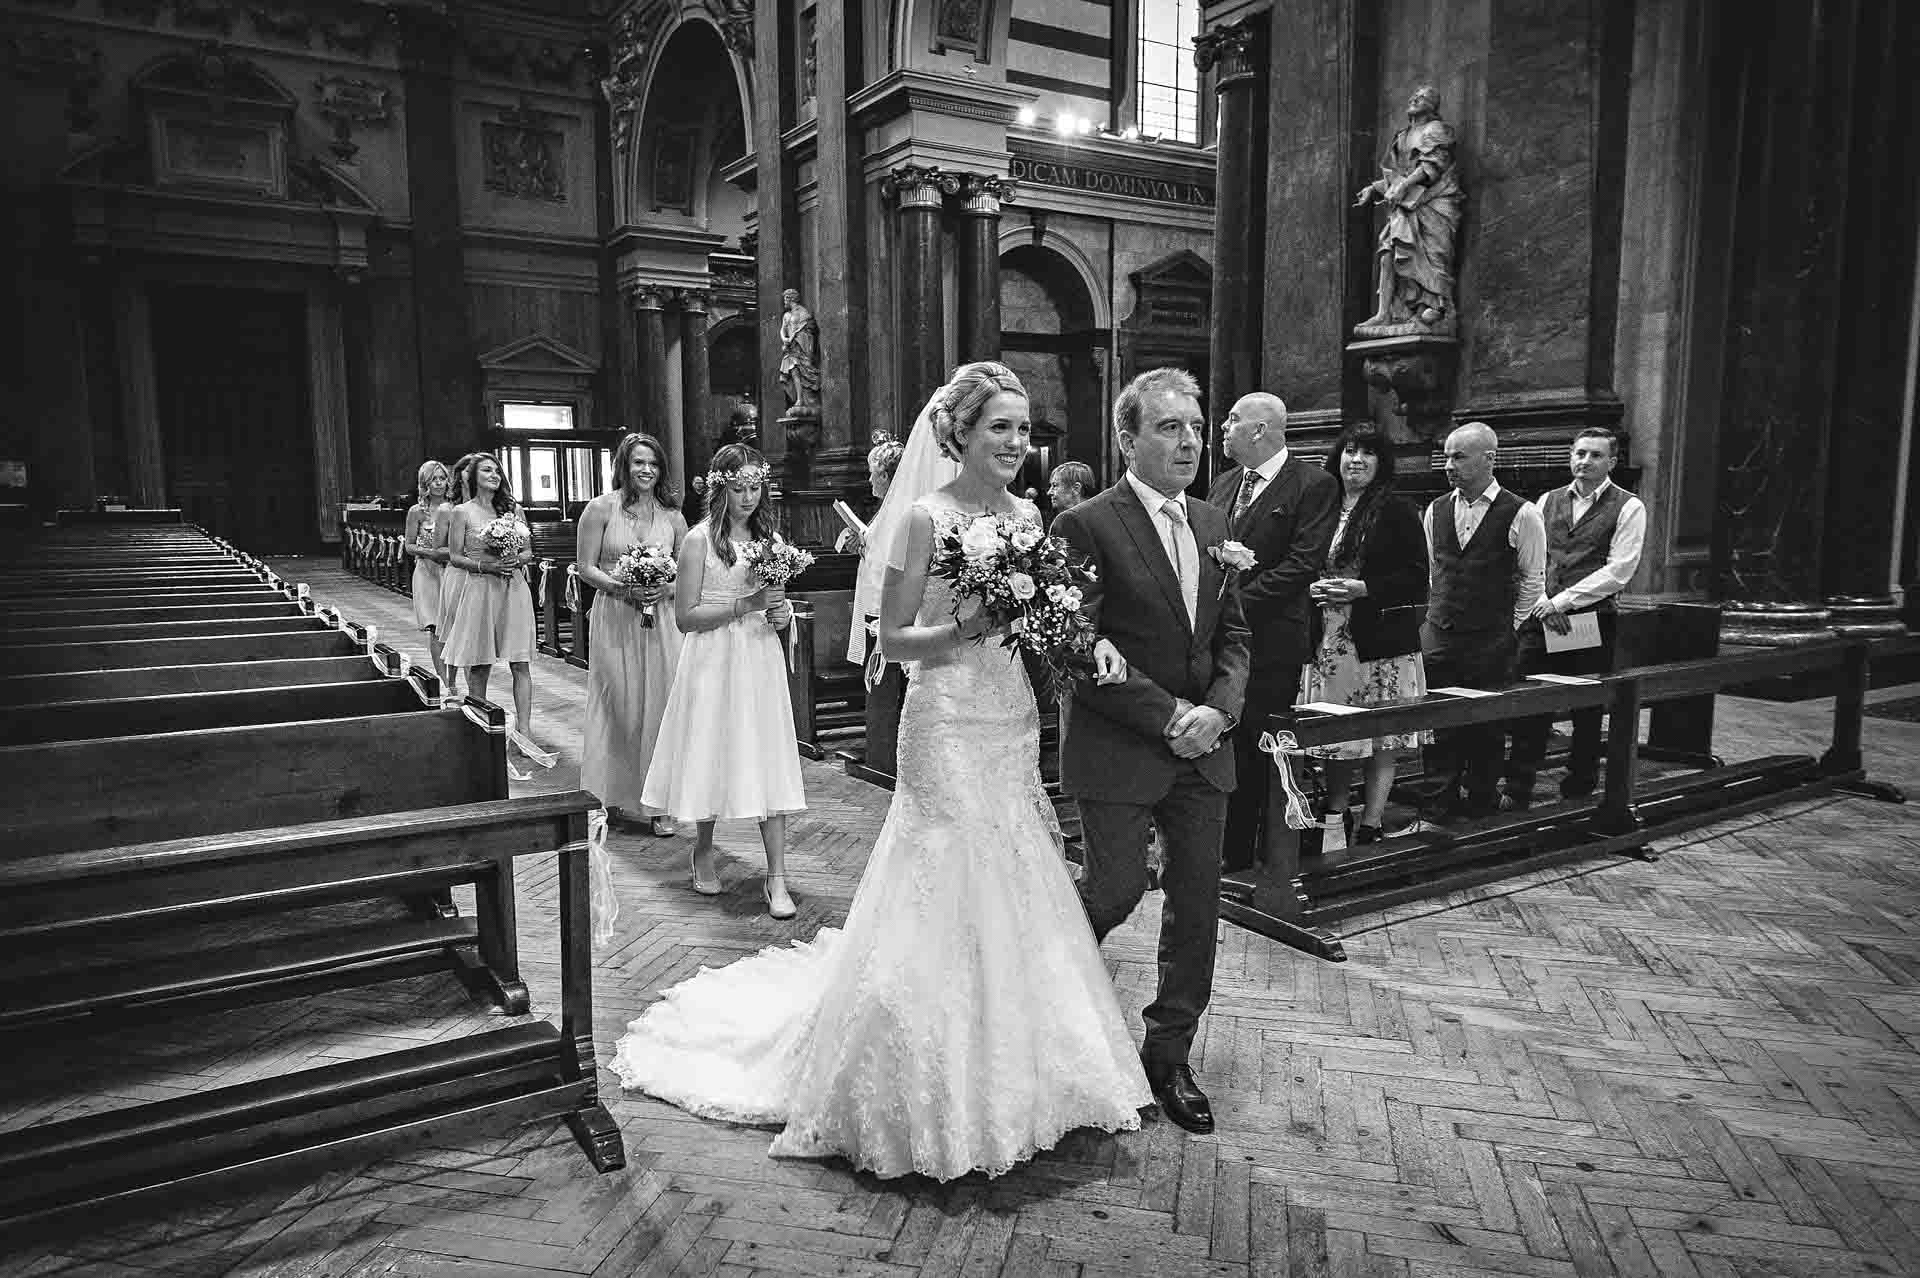 Bridal Procession Down the Aisle at Brompton Oratory